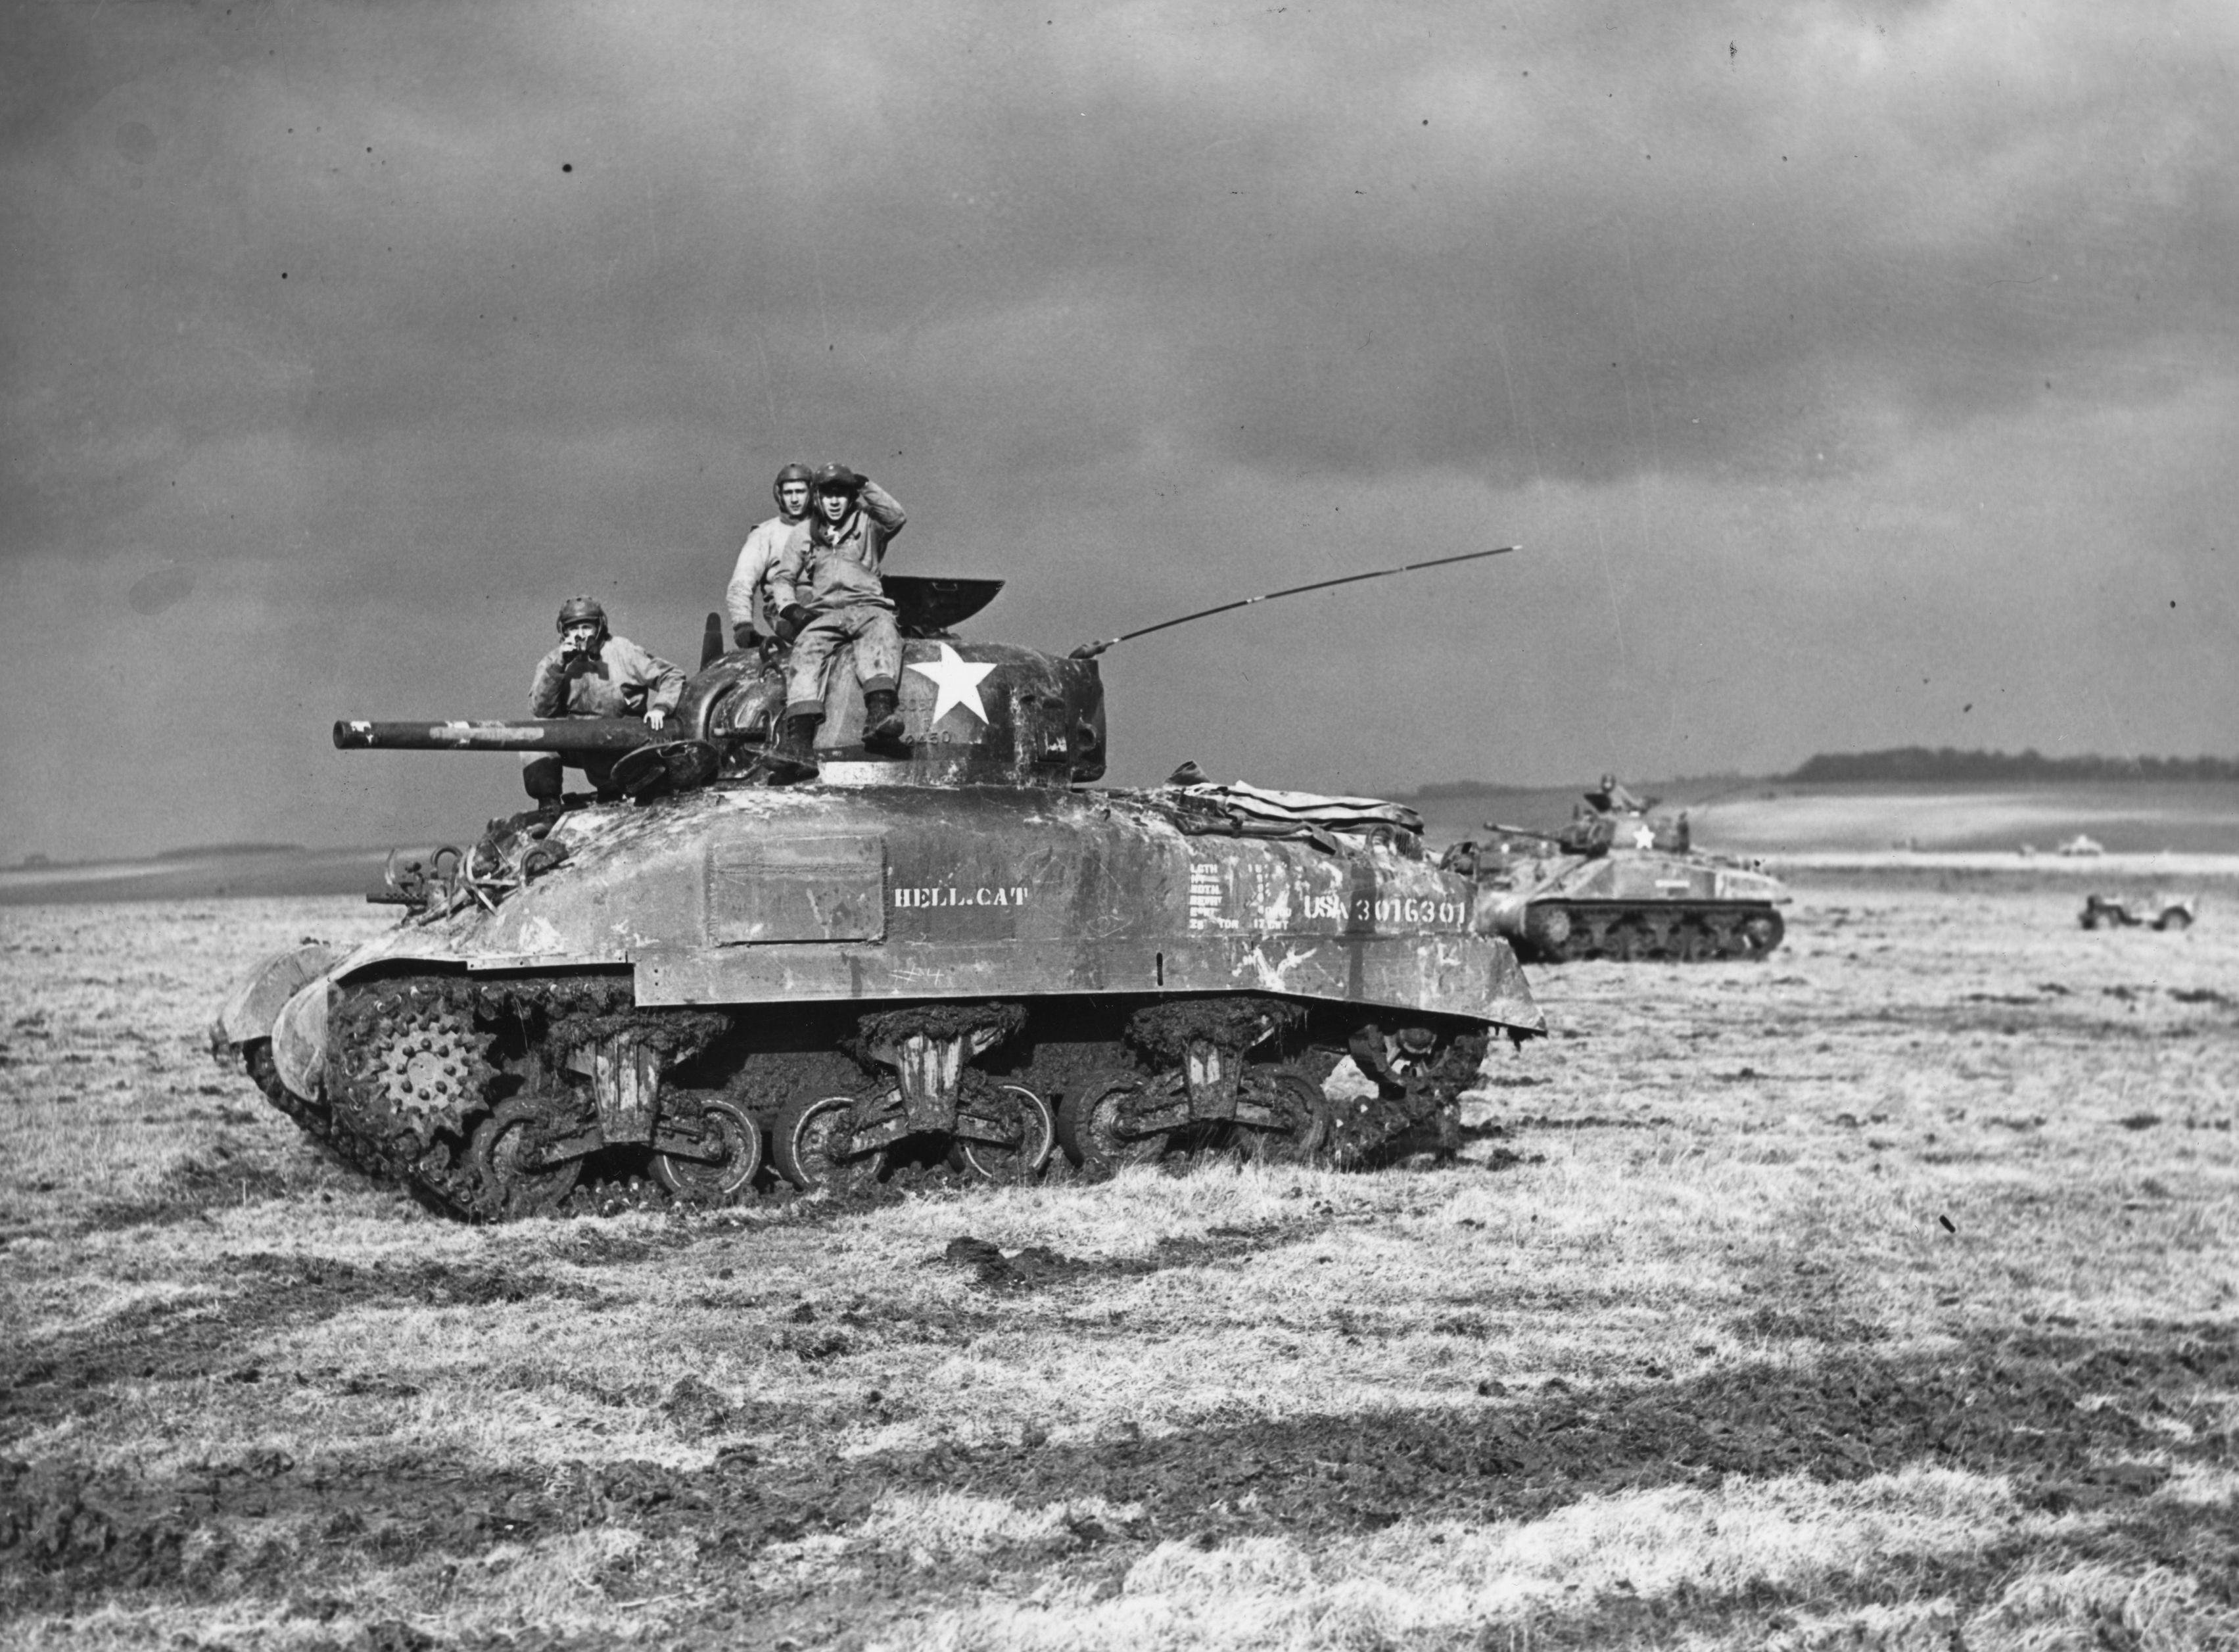 10 Tanks That Changed the History of Armored Warfare